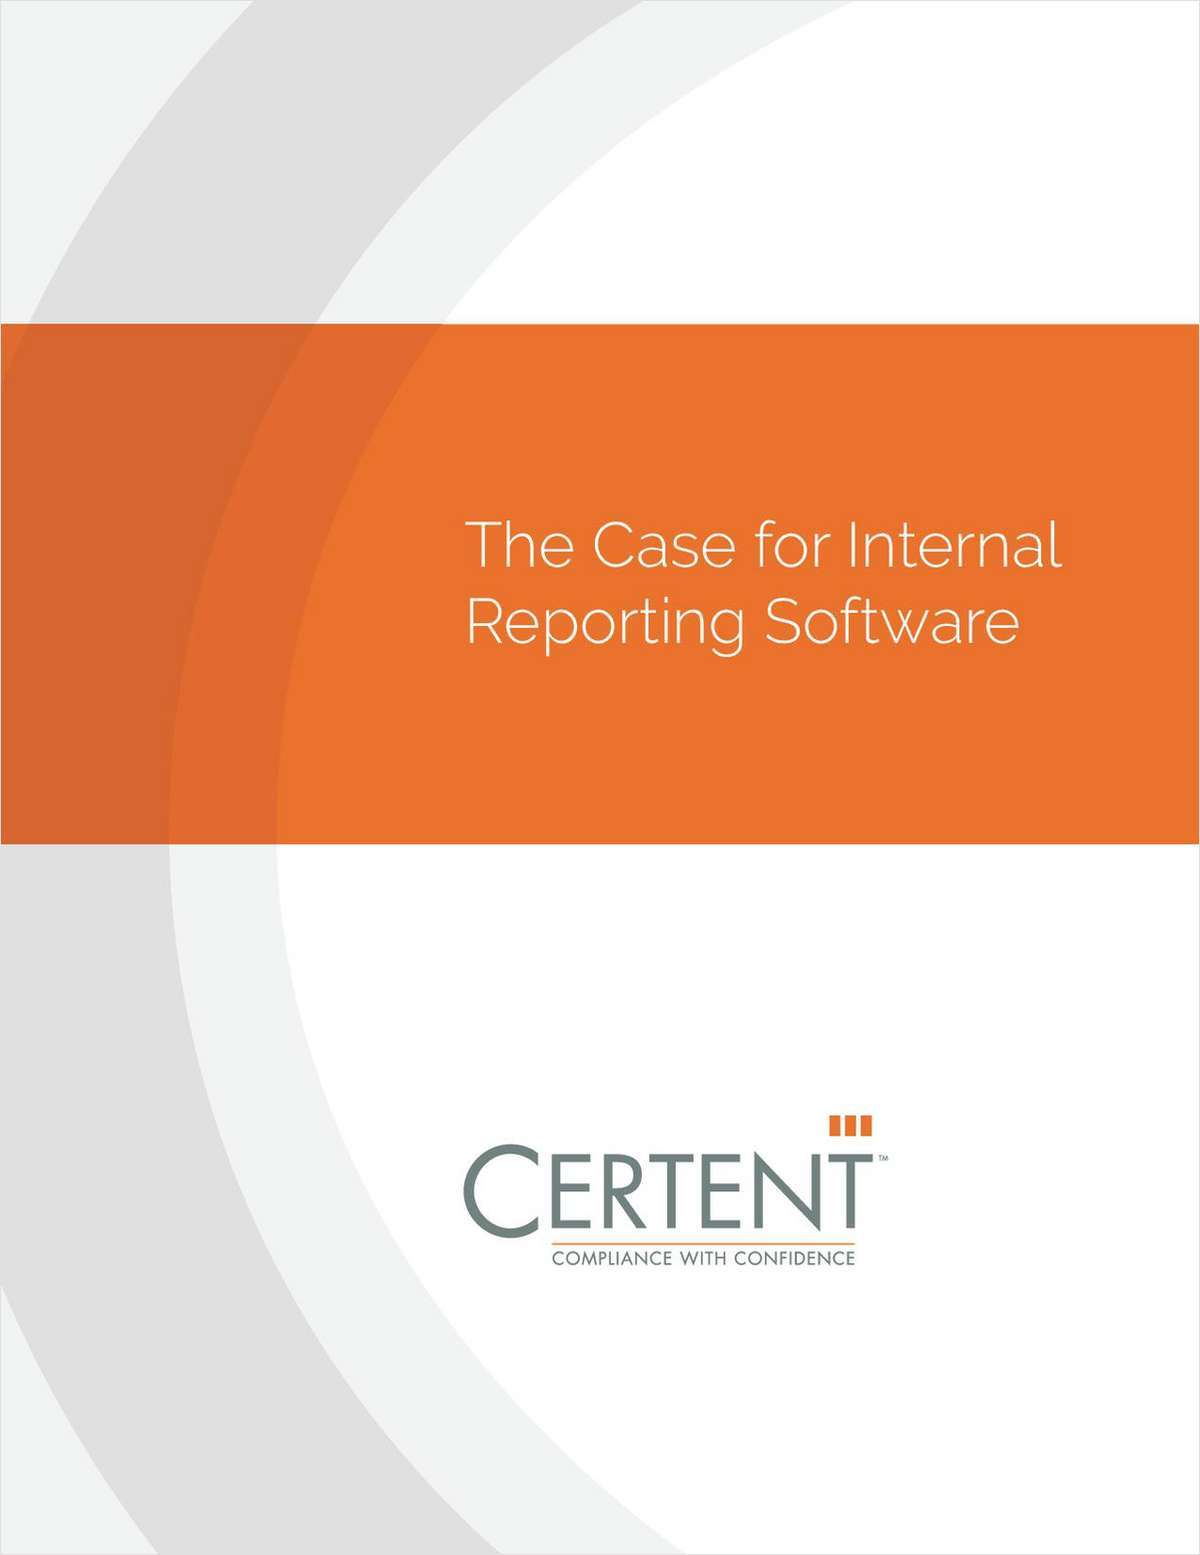 The Case for Internal Reporting Software